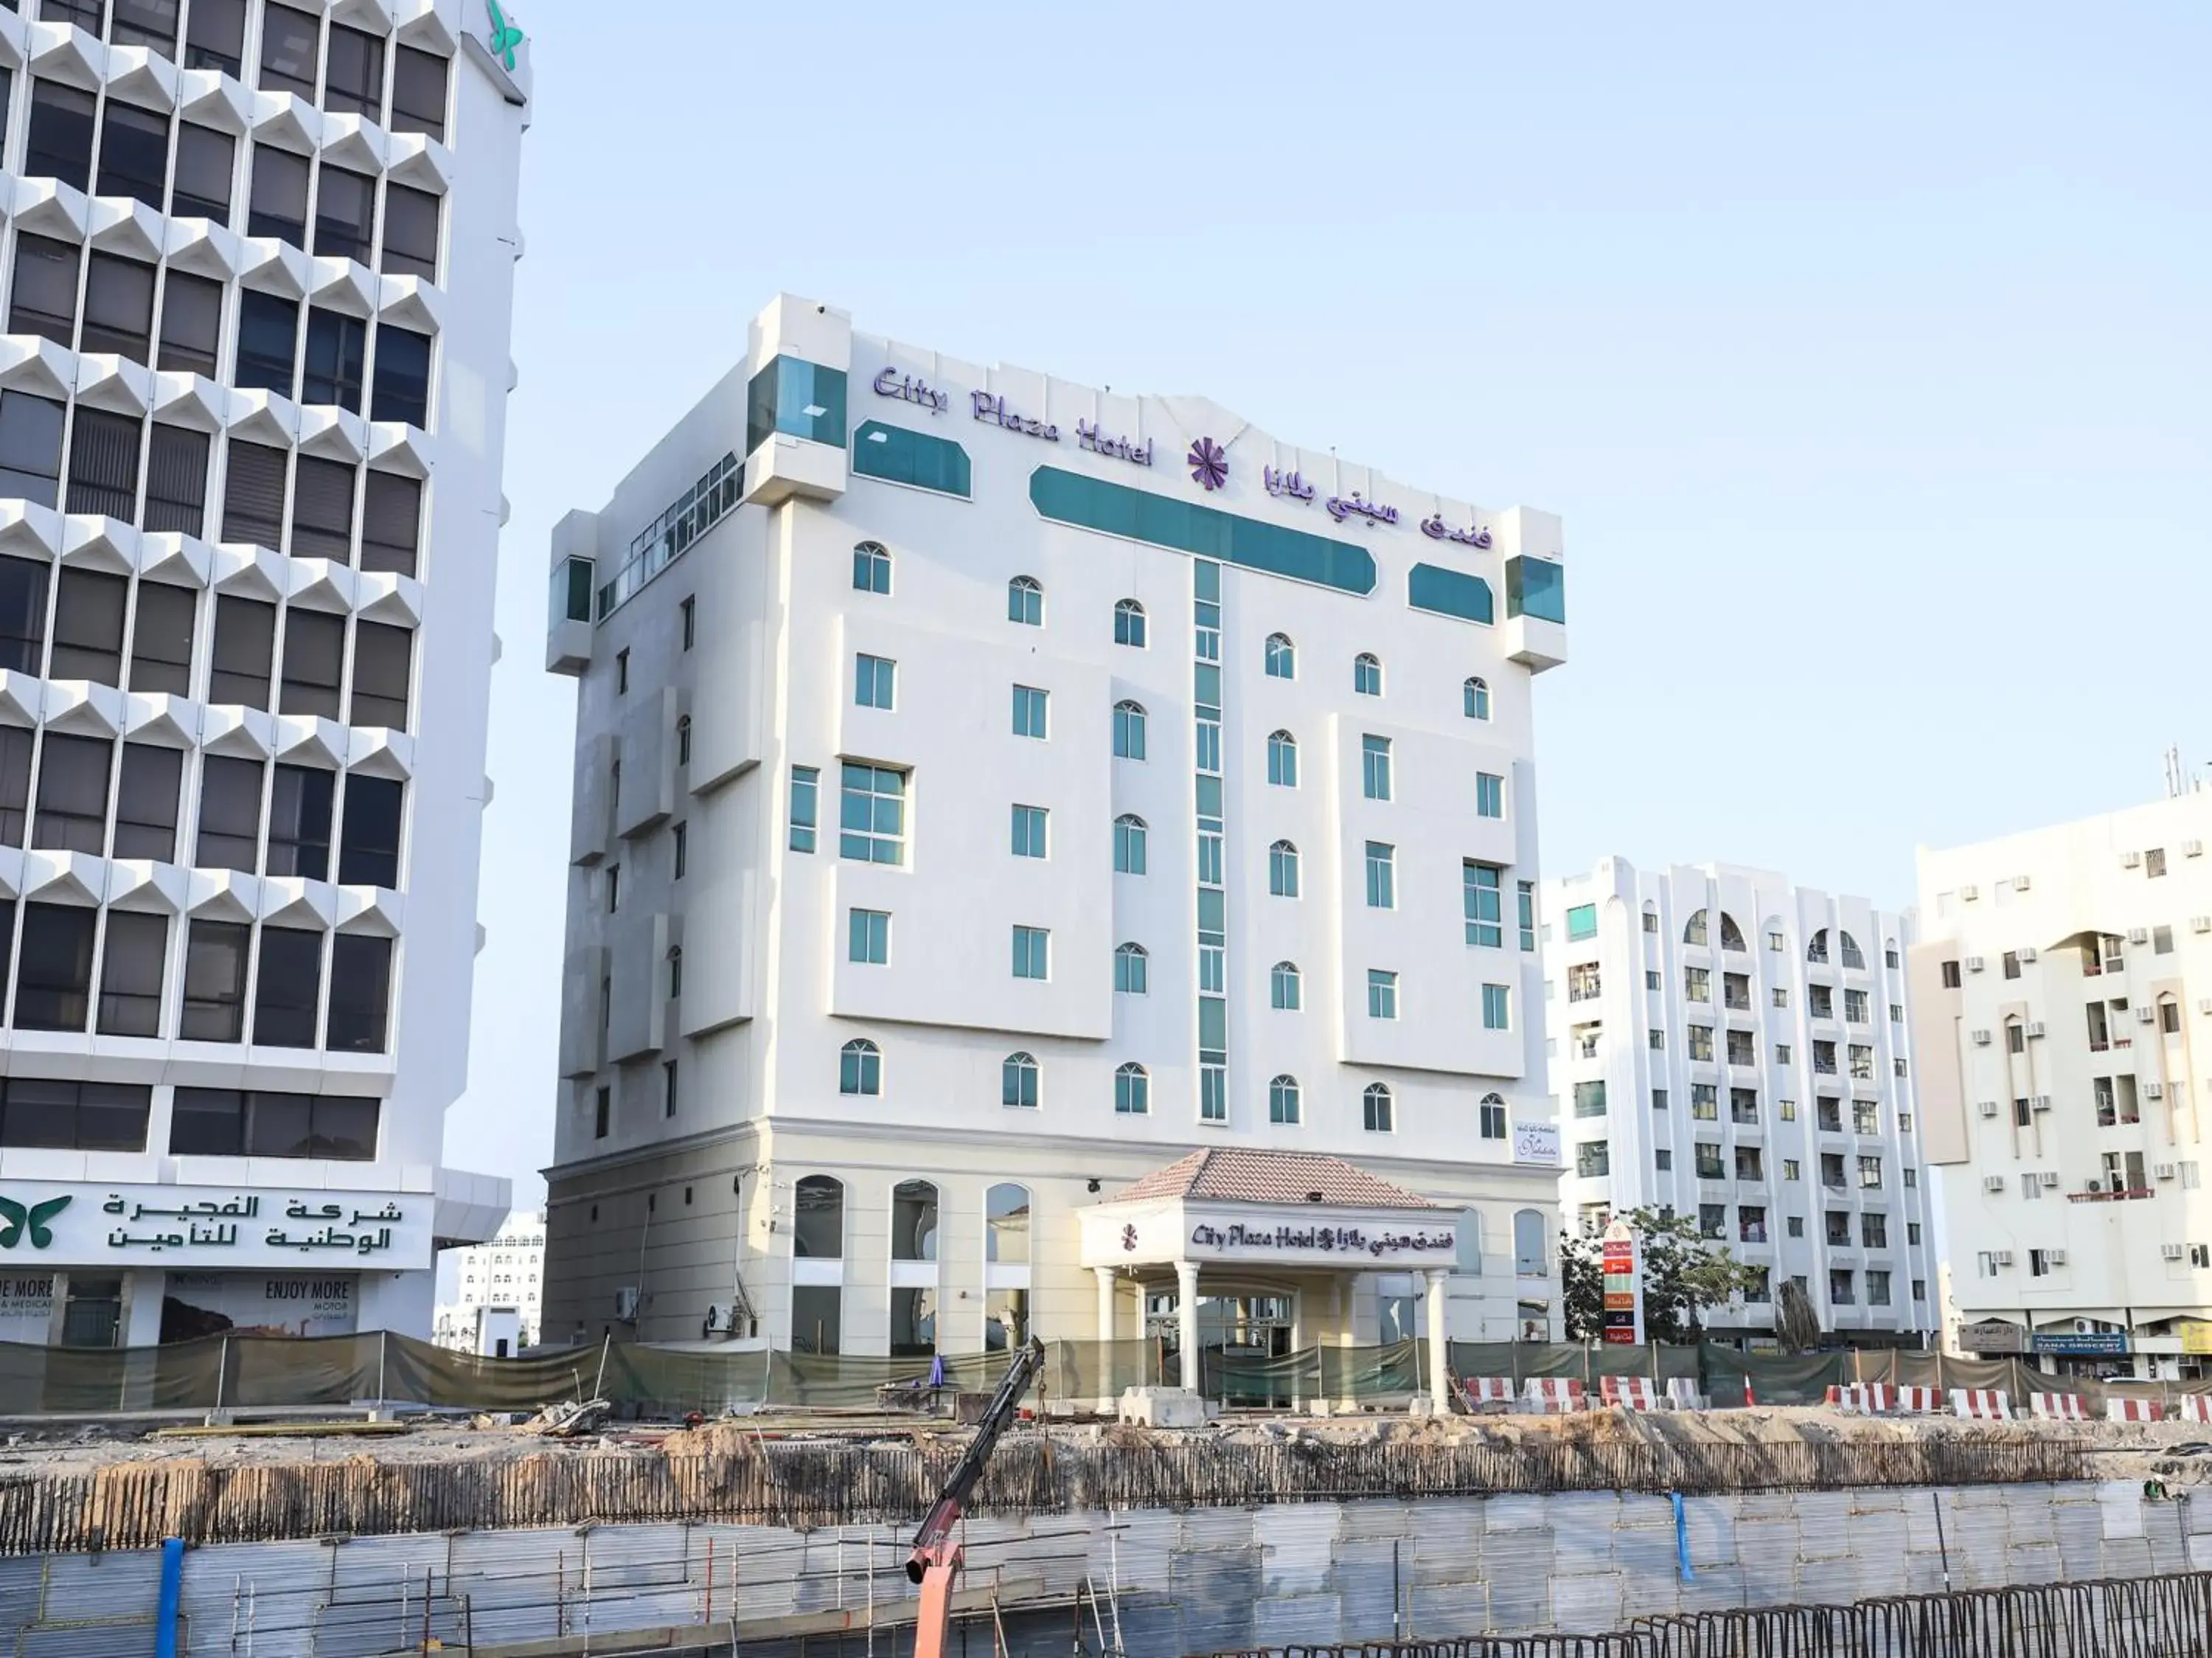 Property Building in OYO 328 City Plaza Hotel